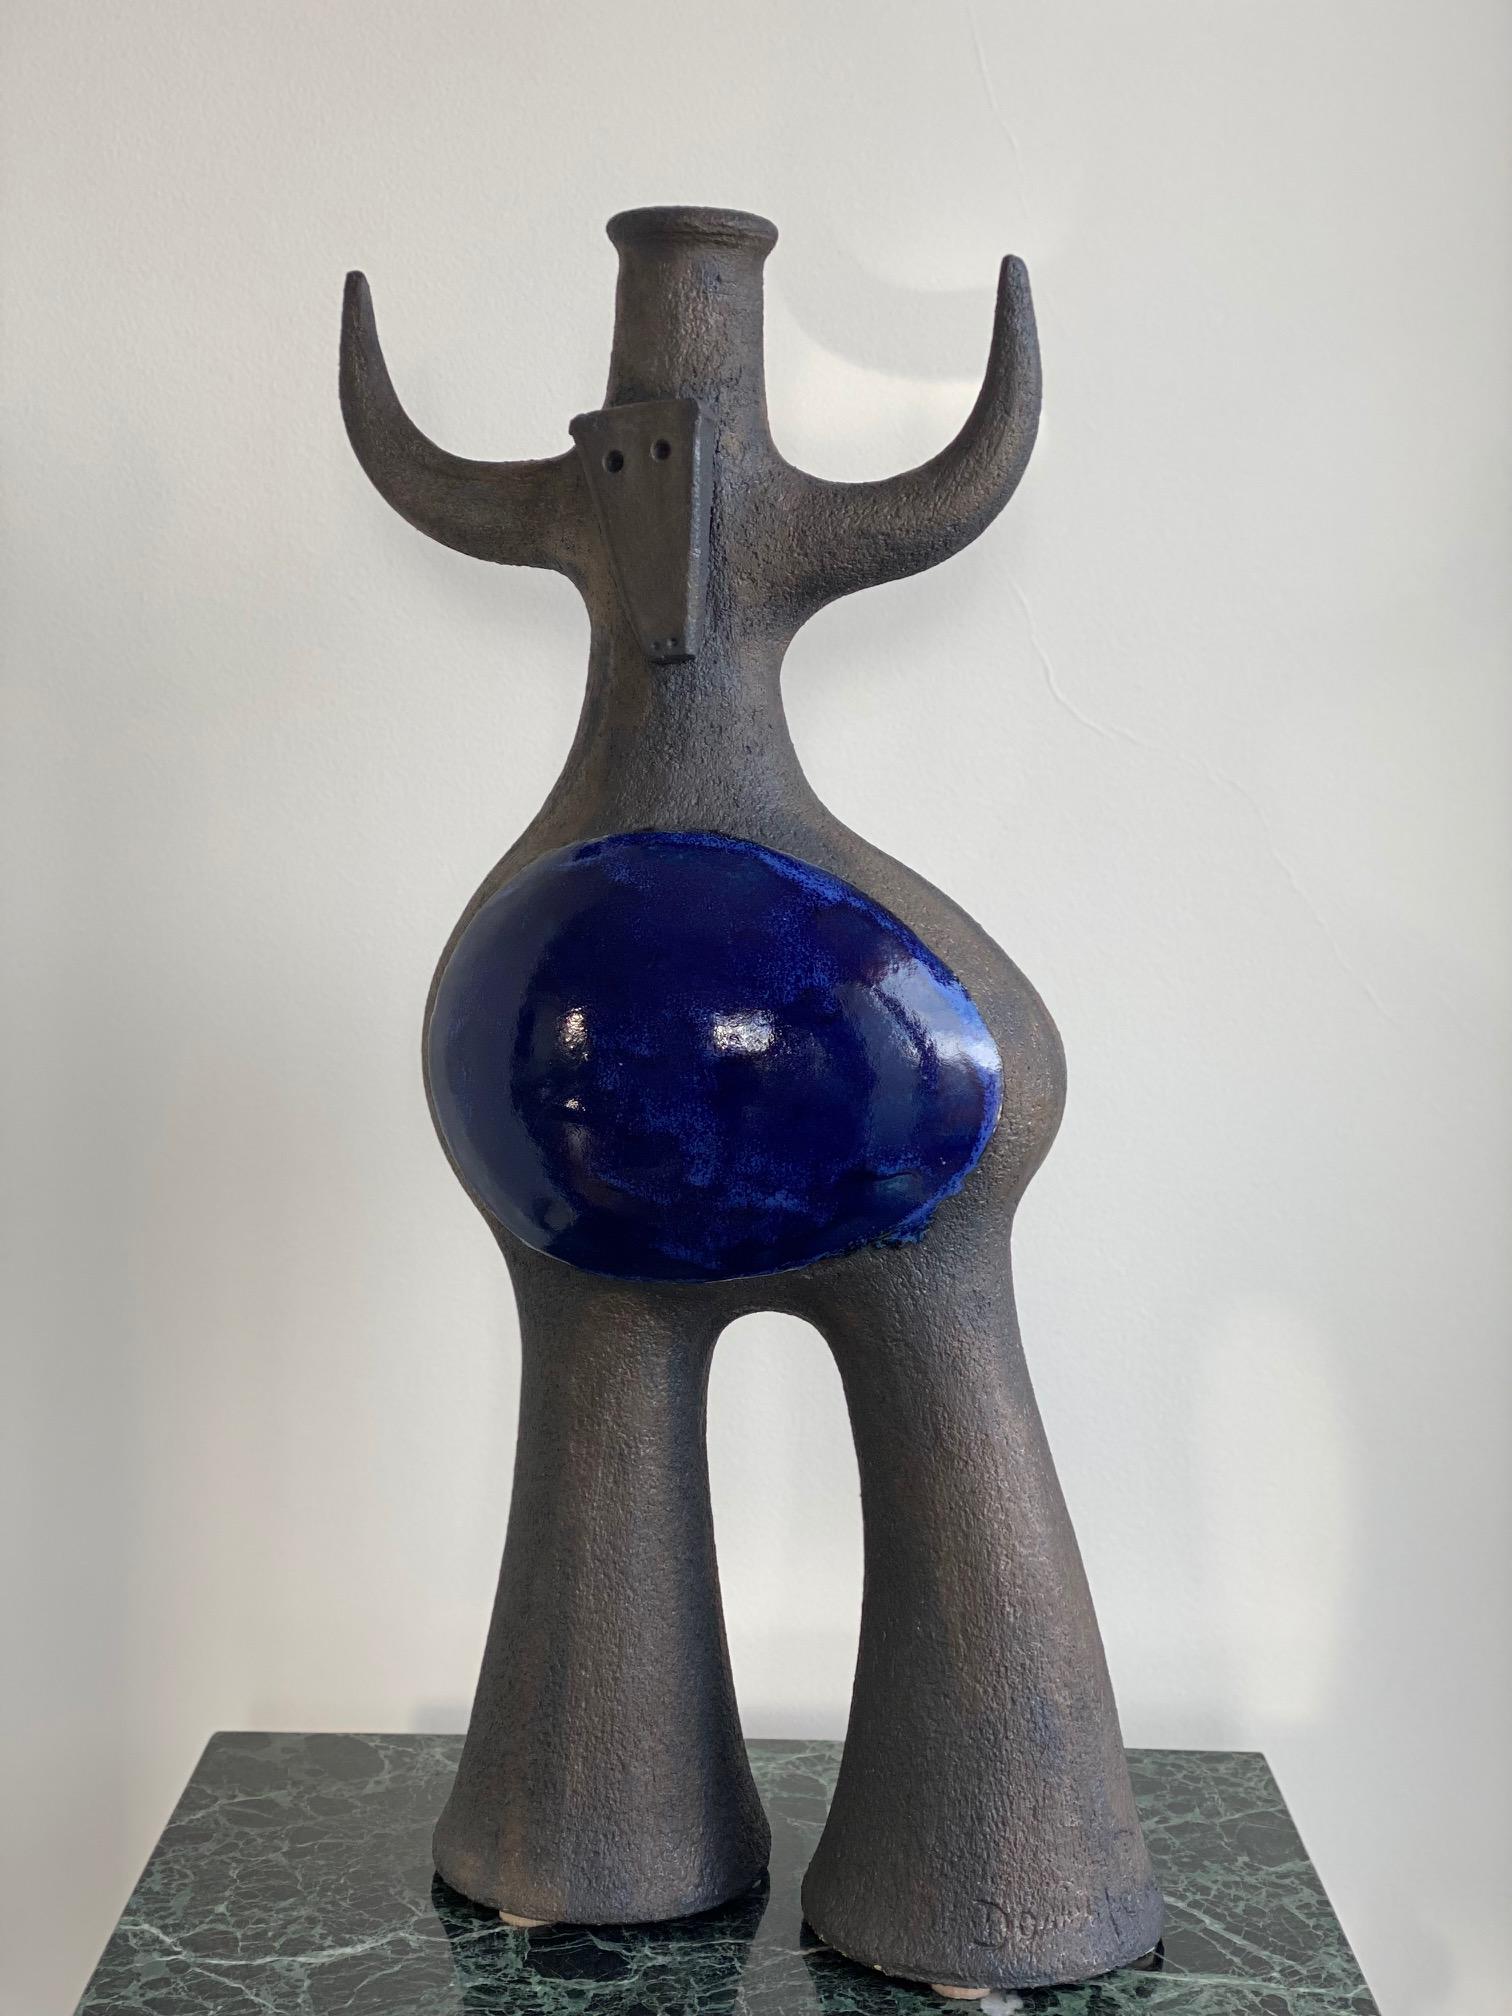 Earthenware sculpture, one of a kind 2021 creation signed by French ceramicist Dominique Pouchain
Dark patina on gray ceramic and shiny blue enamel / Dimensions for ceramic only : H 64 cm x L 28 cm x L 20 cm
Note to international purchasers:
This